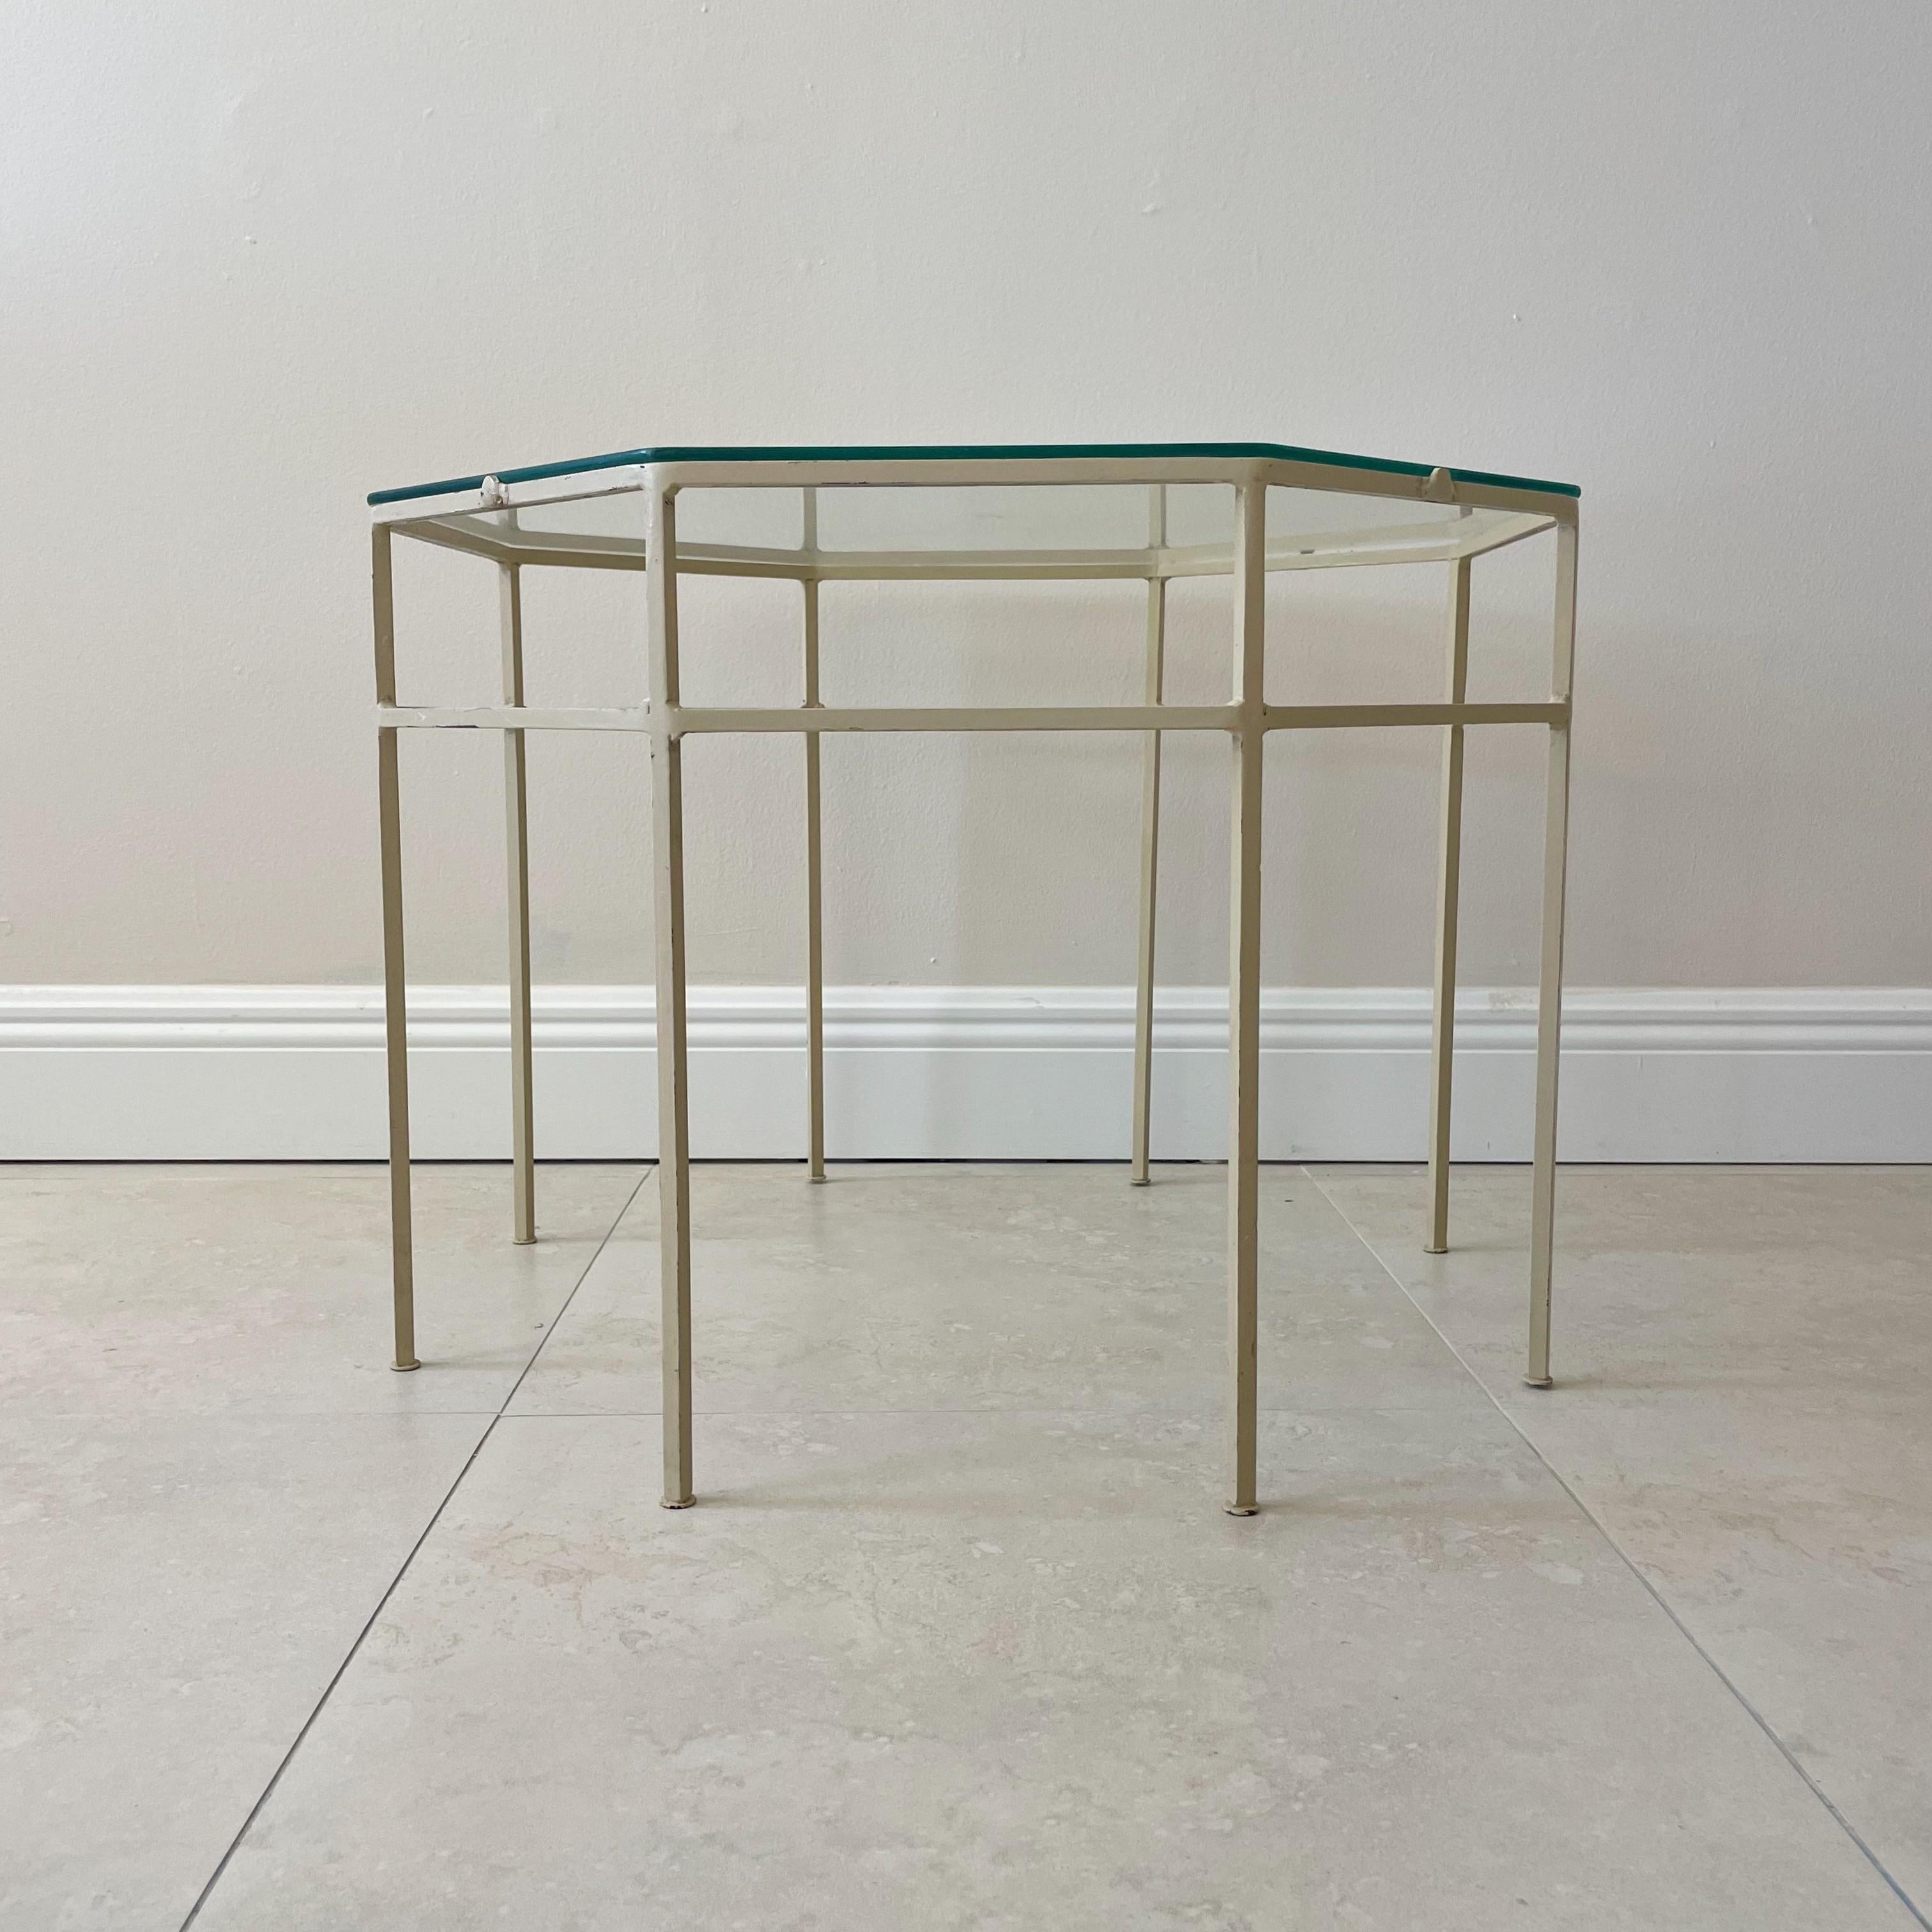 Vintage metal occasional or side table with original off white cream paint and glass top. This table retains its original finish and shows some paint loss and age appropriate wear.